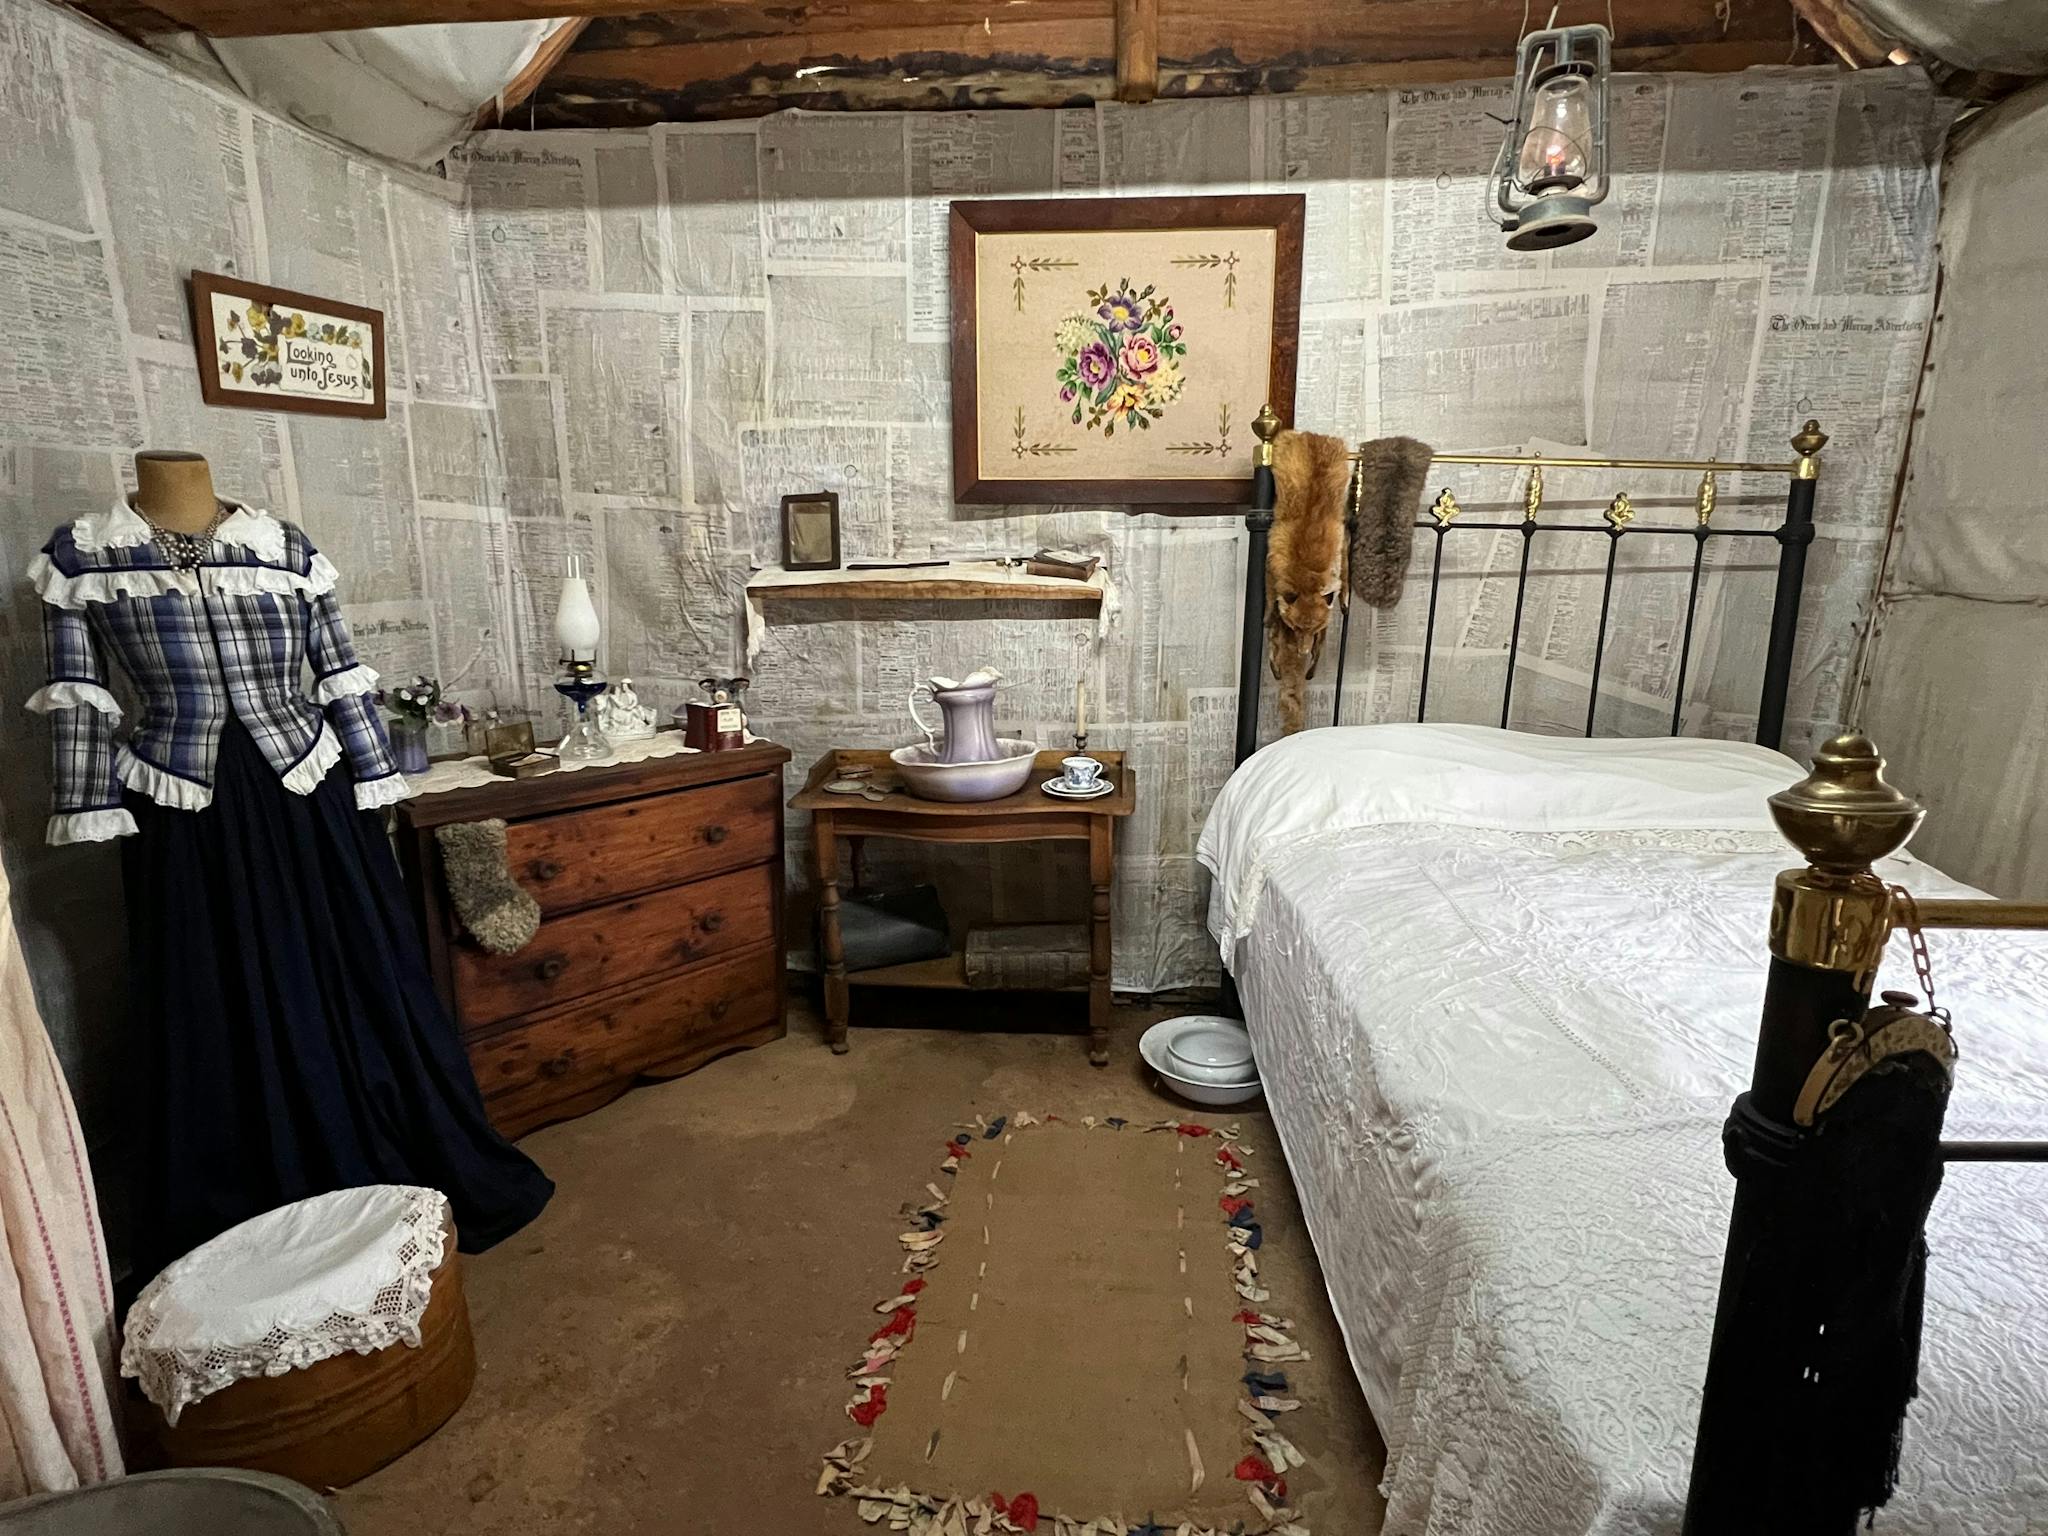 Inside the replica cottage are 3 bedrooms and a family kitchen